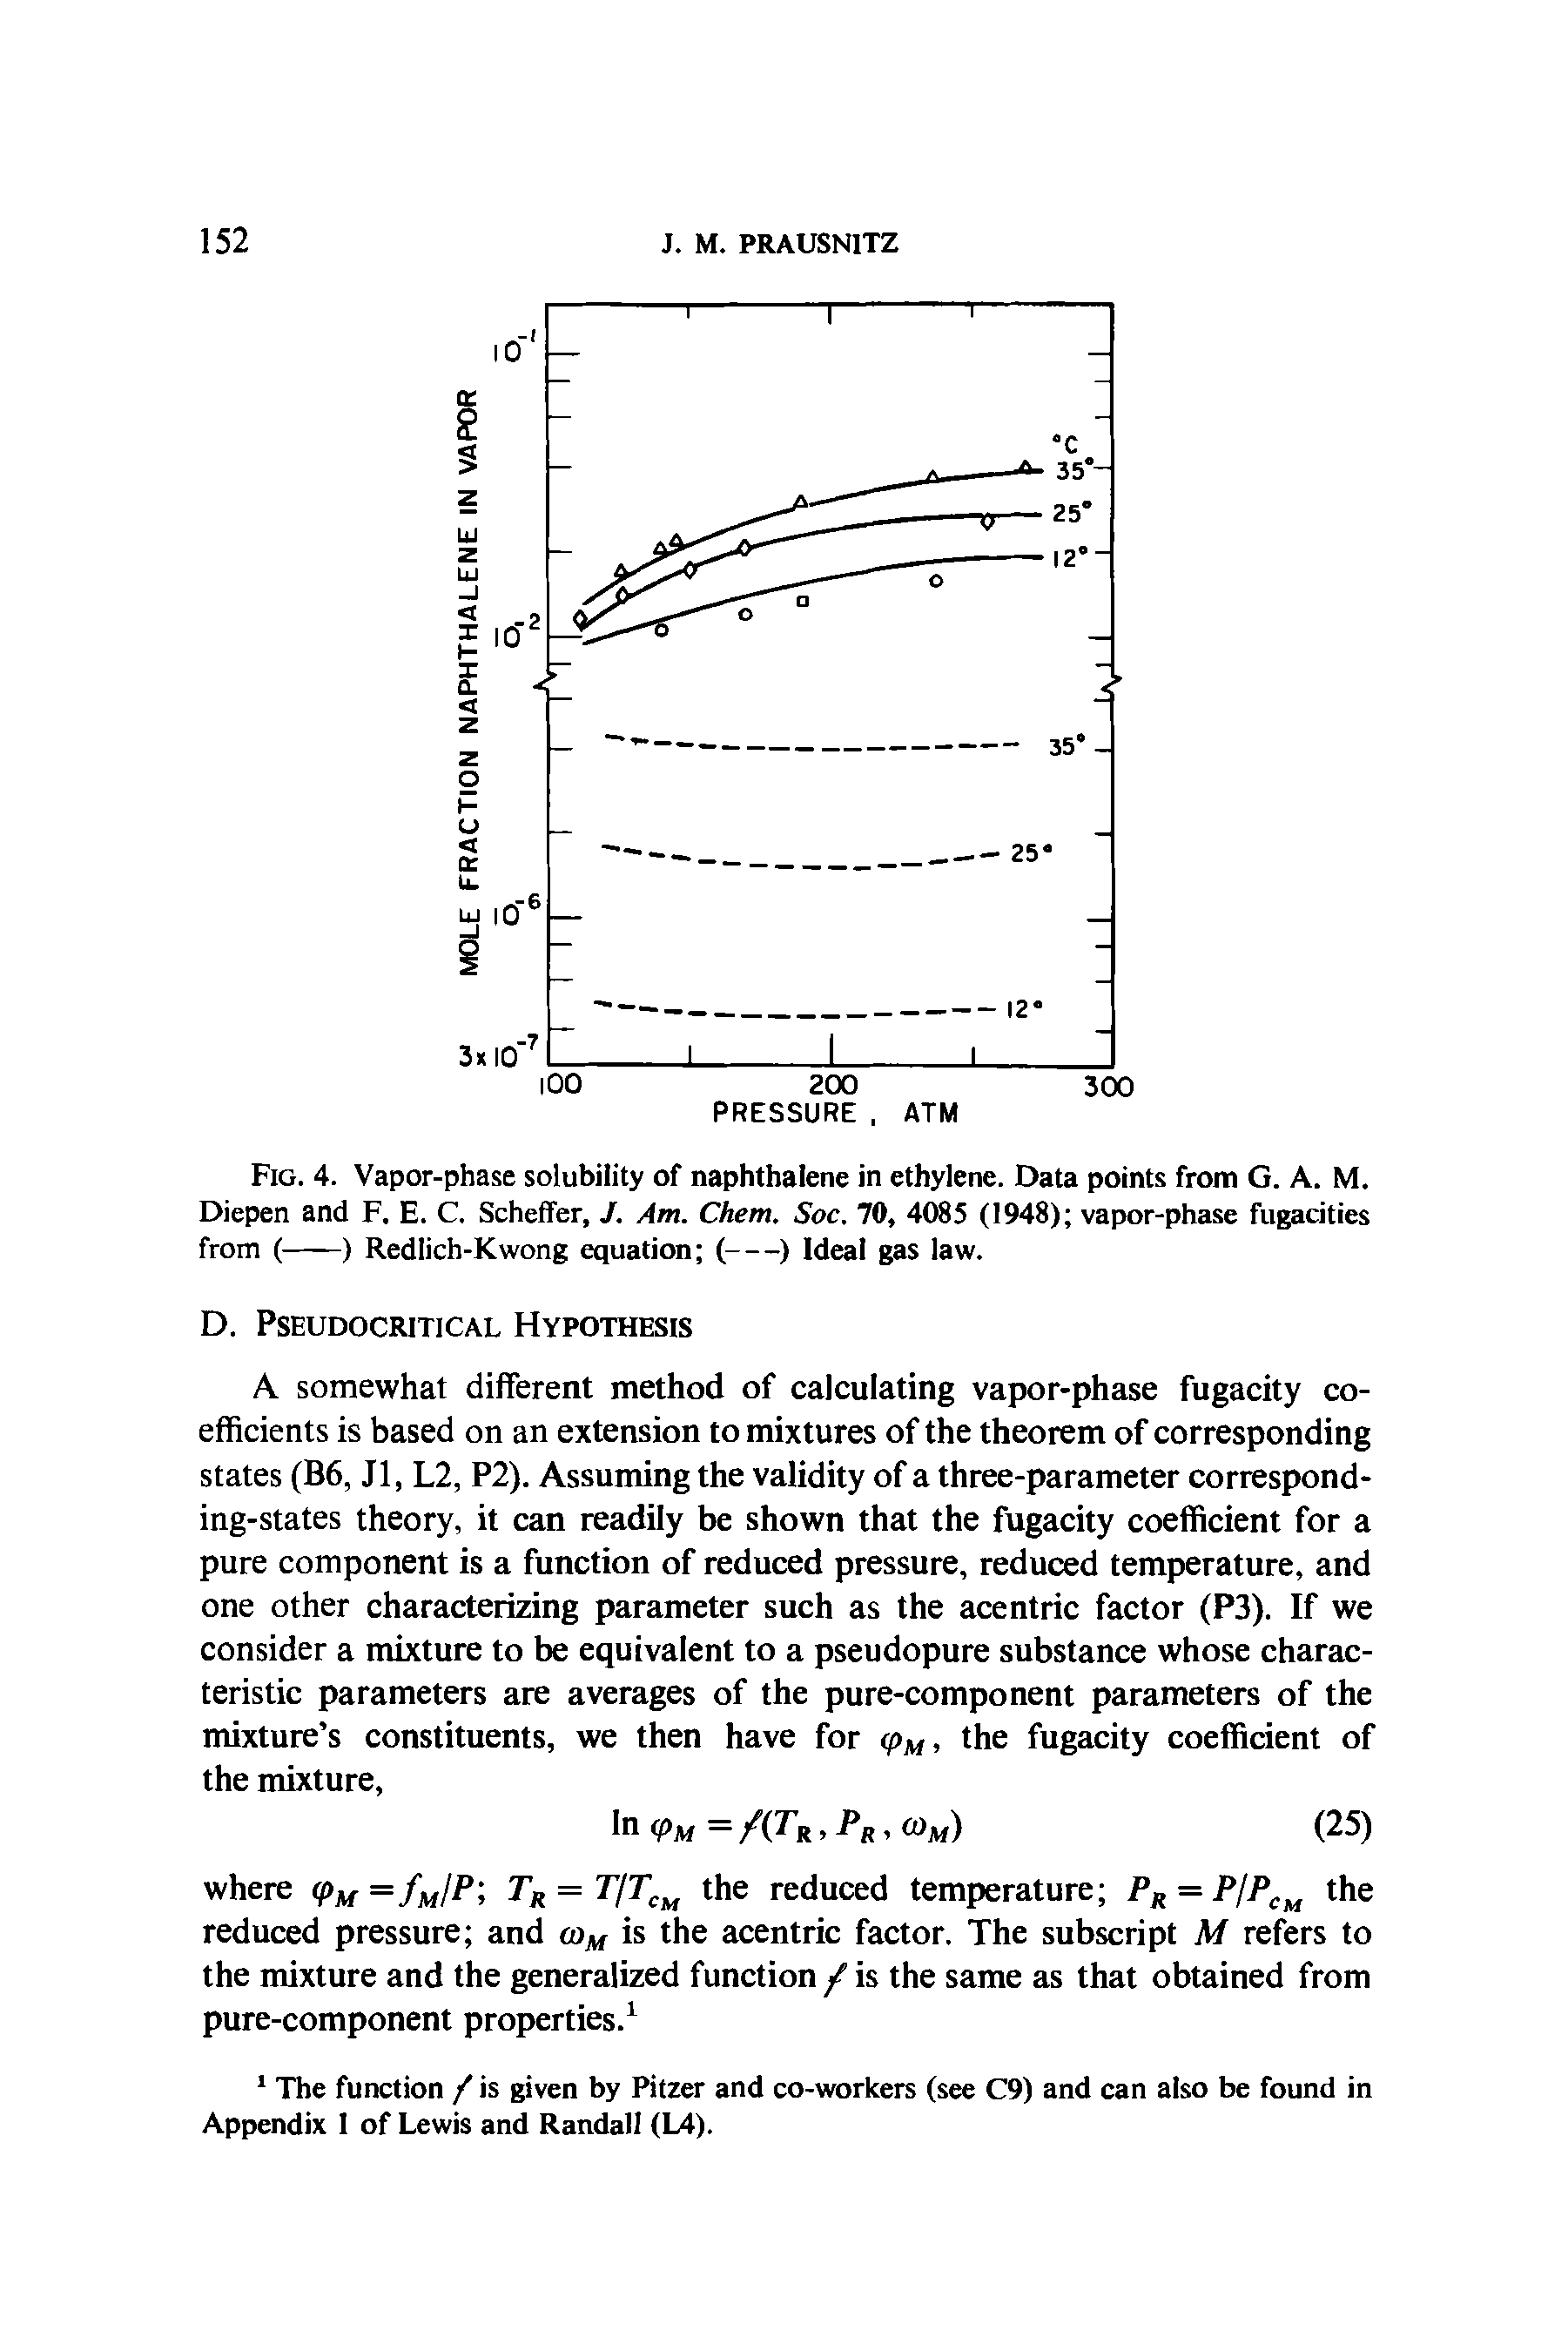 Fig. 4. Vapor-phase solubility of naphthalene in ethylene. Data points from G. A. M. Diepen and F. E. C. Scheffer, J. Am. Chem. Soc. 70, 4085 (1948) vapor-phase fugacities from (---) Redlich-Kwong equation (-) Ideal gas law.